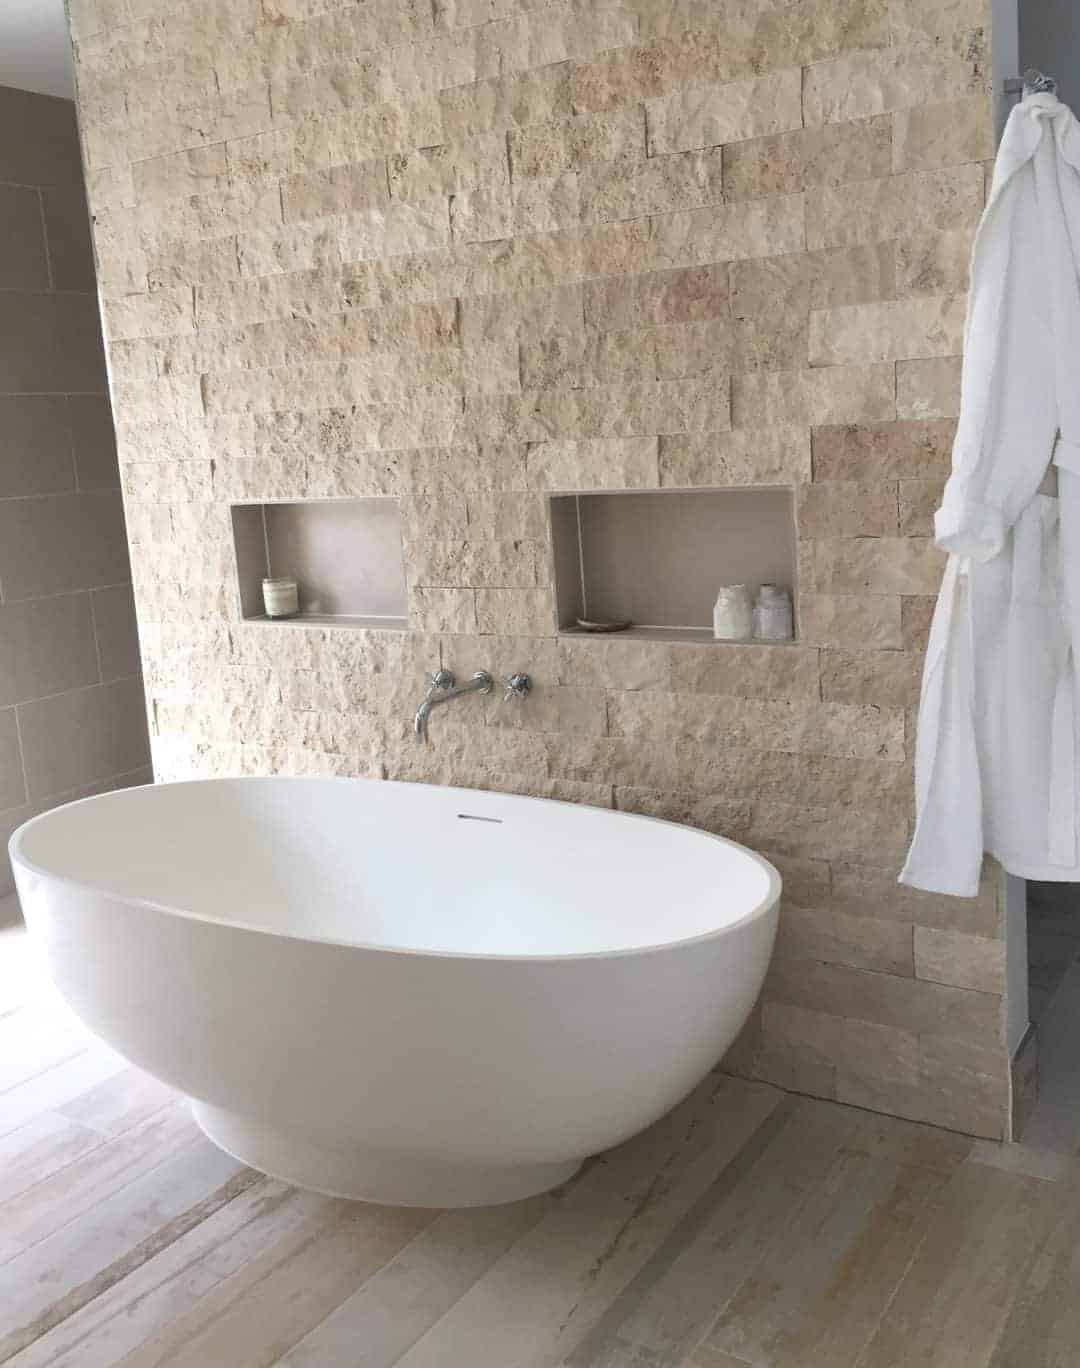 beautiful limestone and driftwood bathroom at sea edge downderry cornwall click through for more beautiful images of this coastal dream home and other great finds in the area